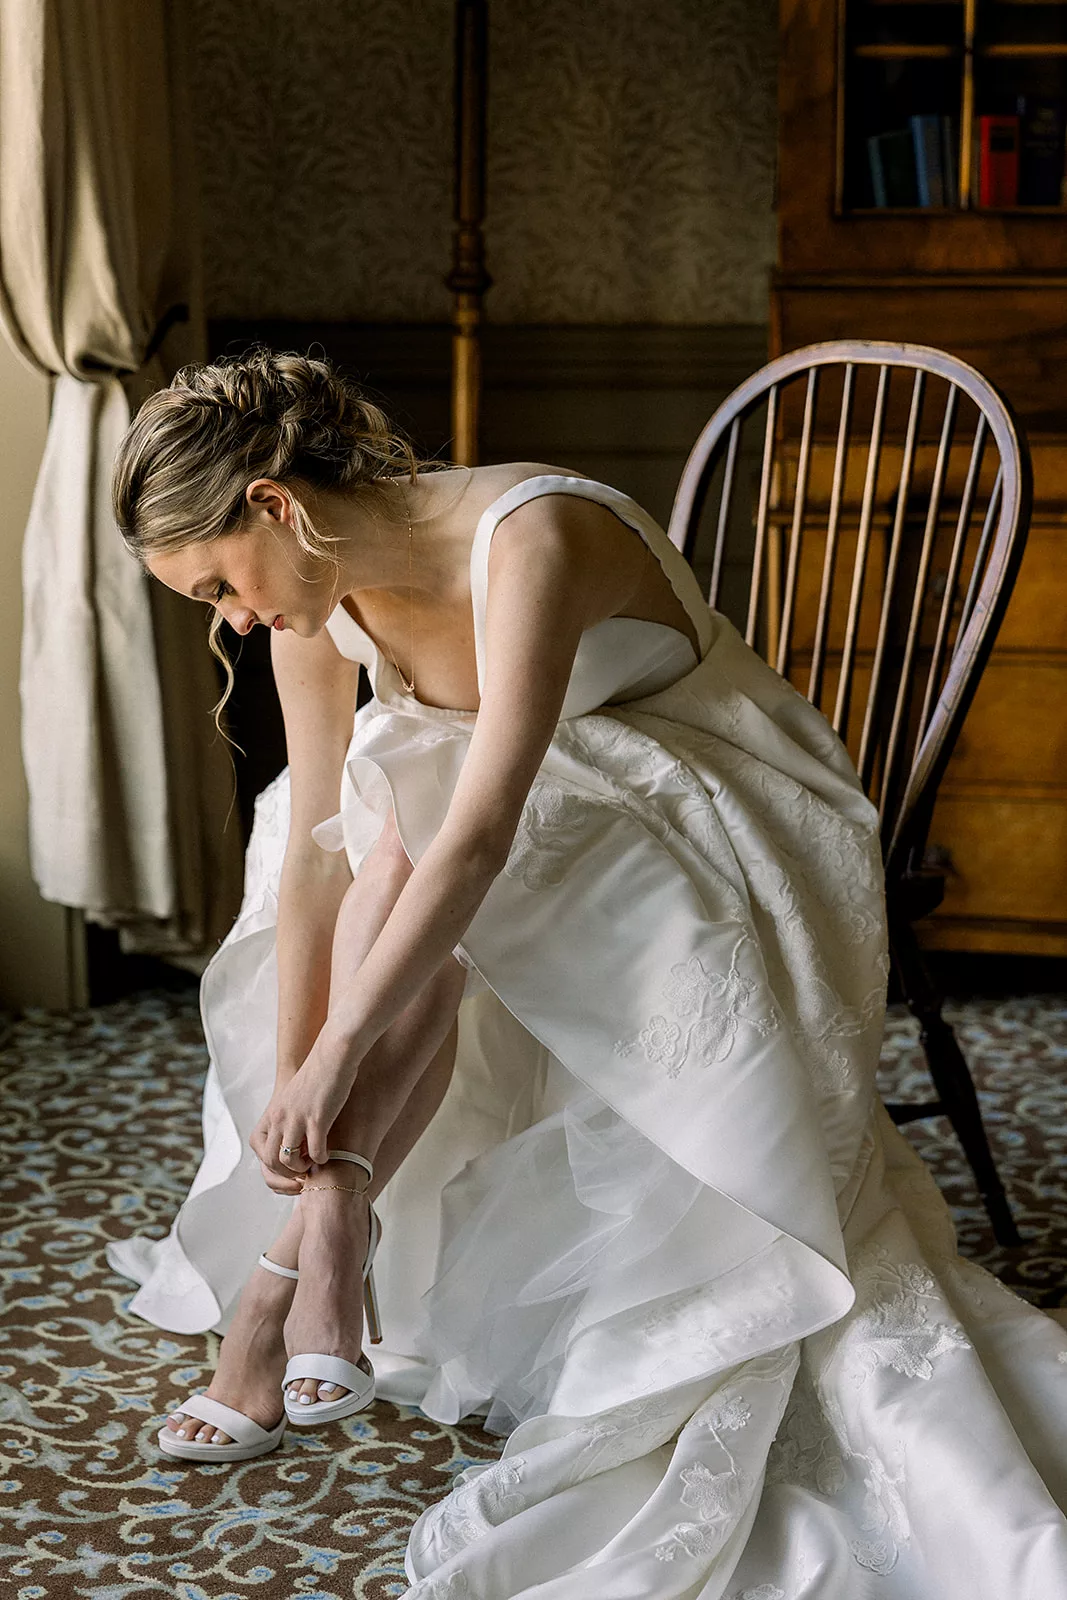 A bride sits in her getting ready room fixing her shoes